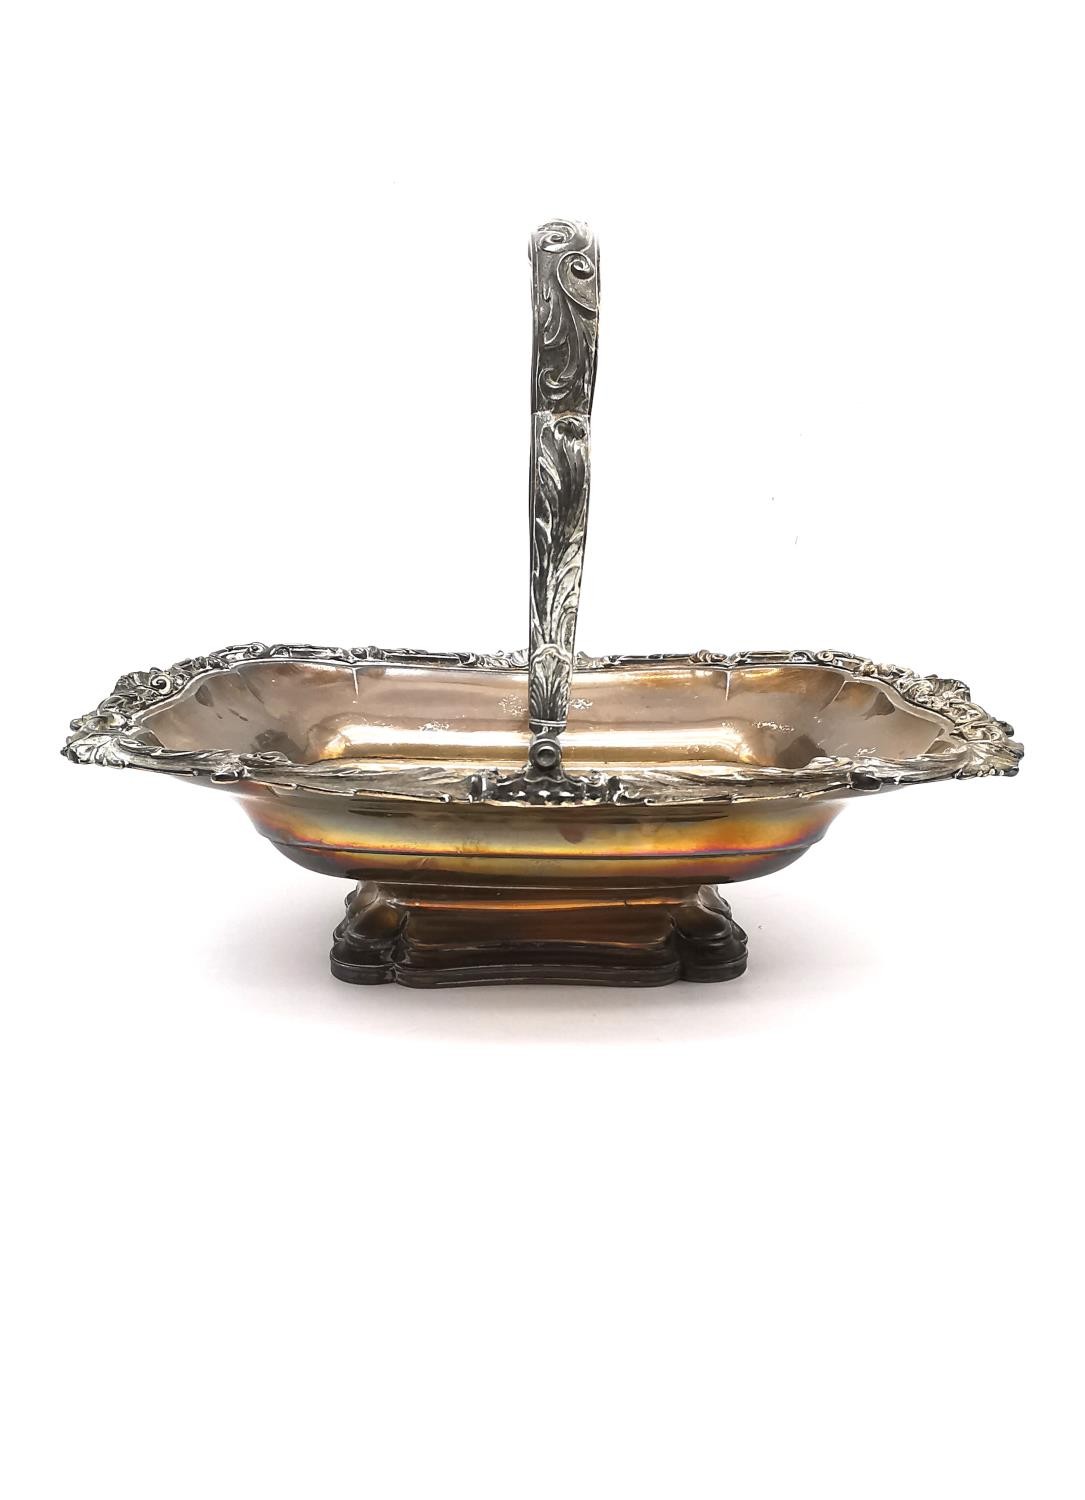 A Georgian sterling silver swing handle fruit basket with sculptural shell and scrolling foliate - Image 2 of 9